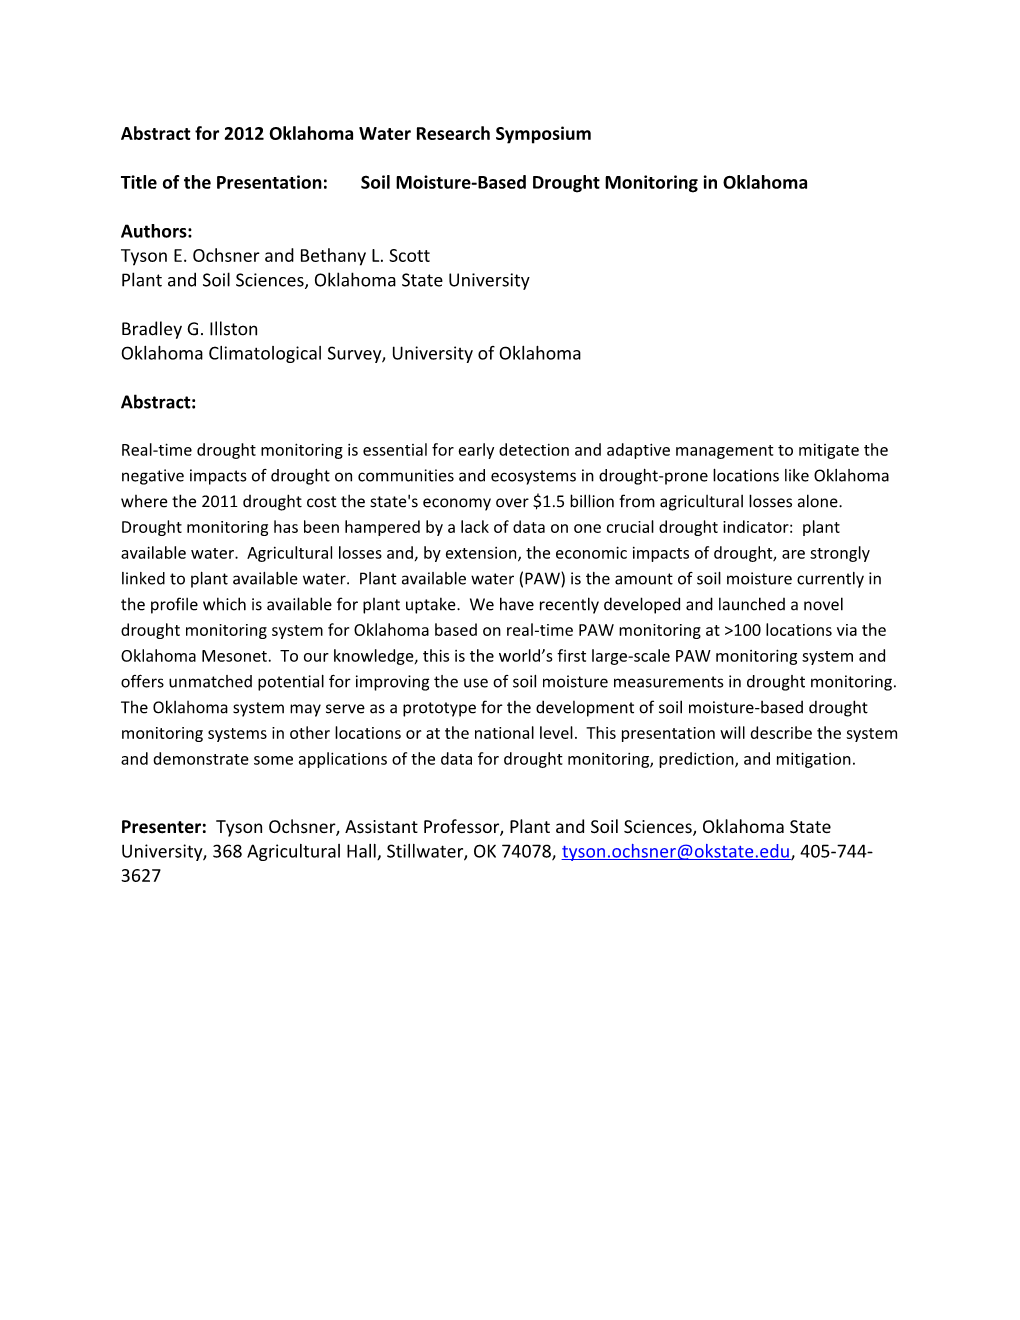 Abstract for 2012 Oklahoma Water Research Symposium